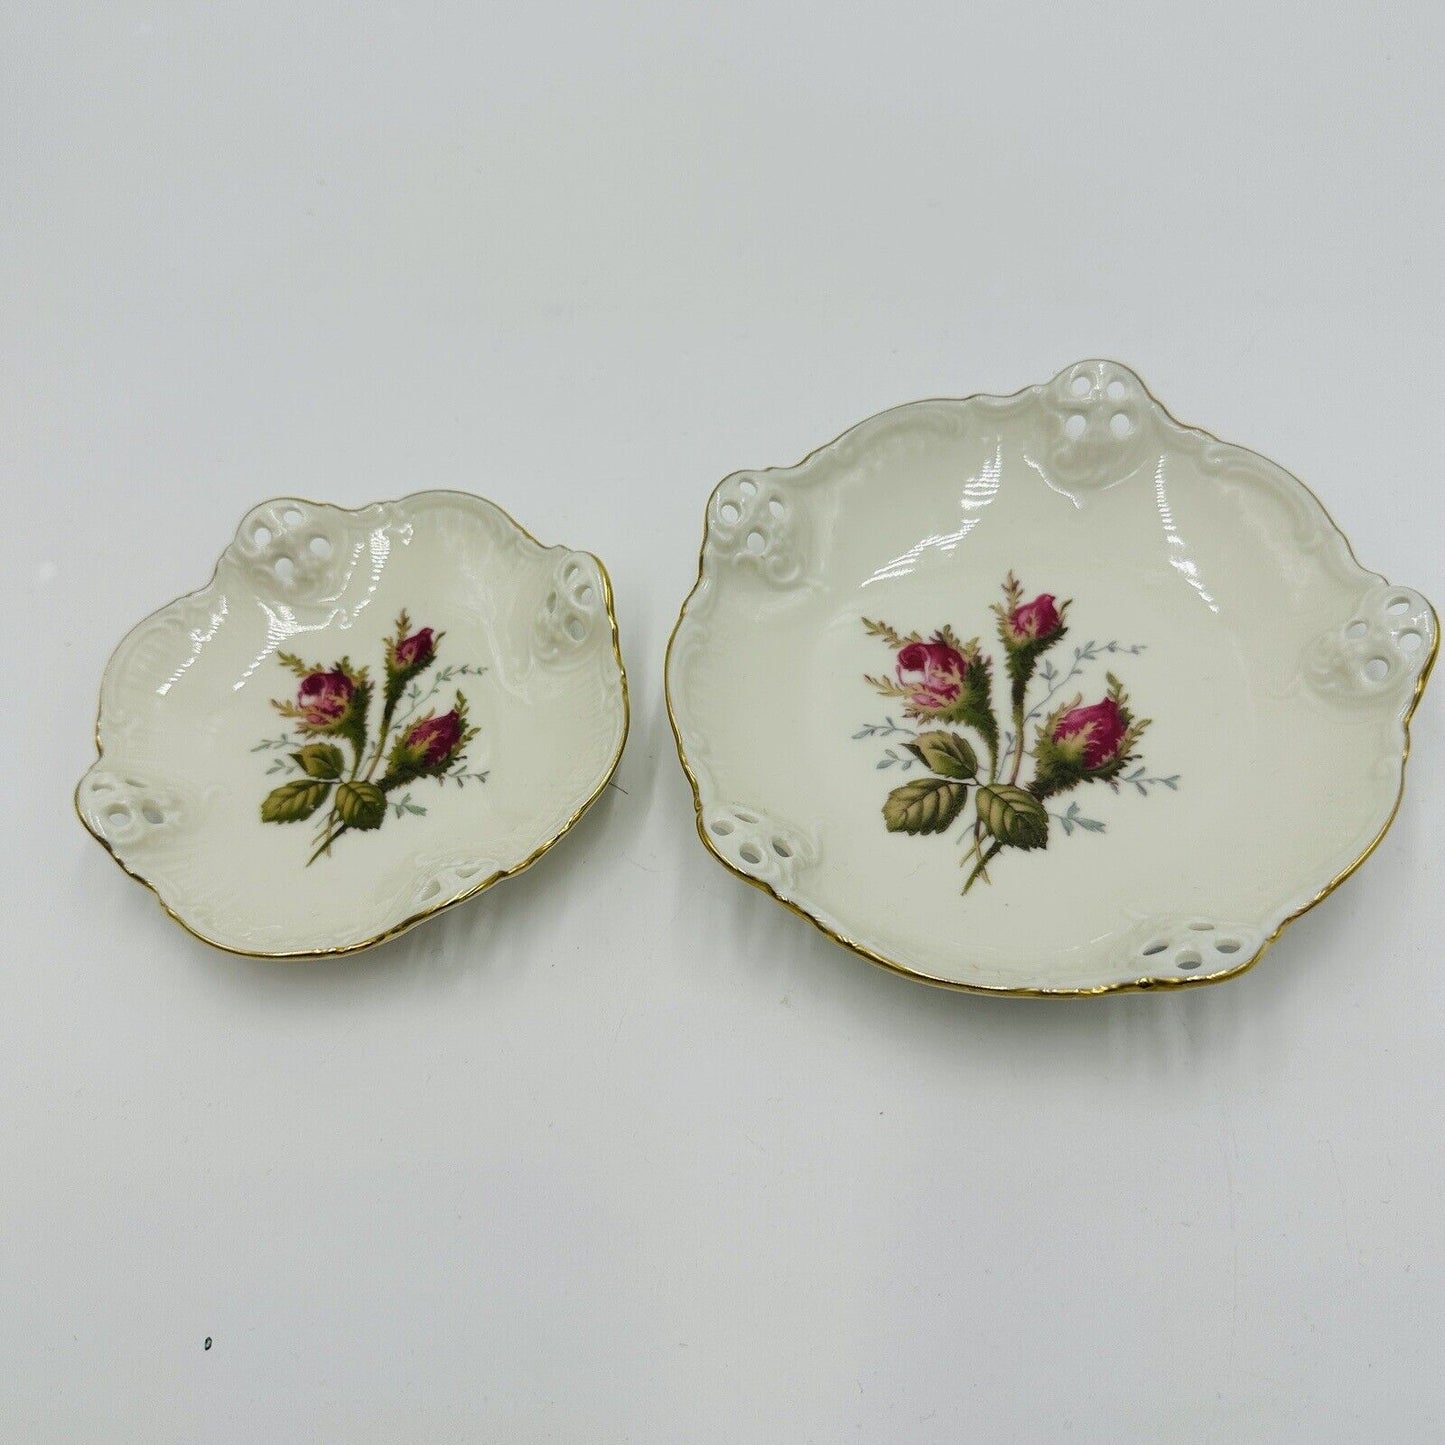 Rosenthal Moliere Moss Rose 4" Pierced Porcelain candy dishes floral